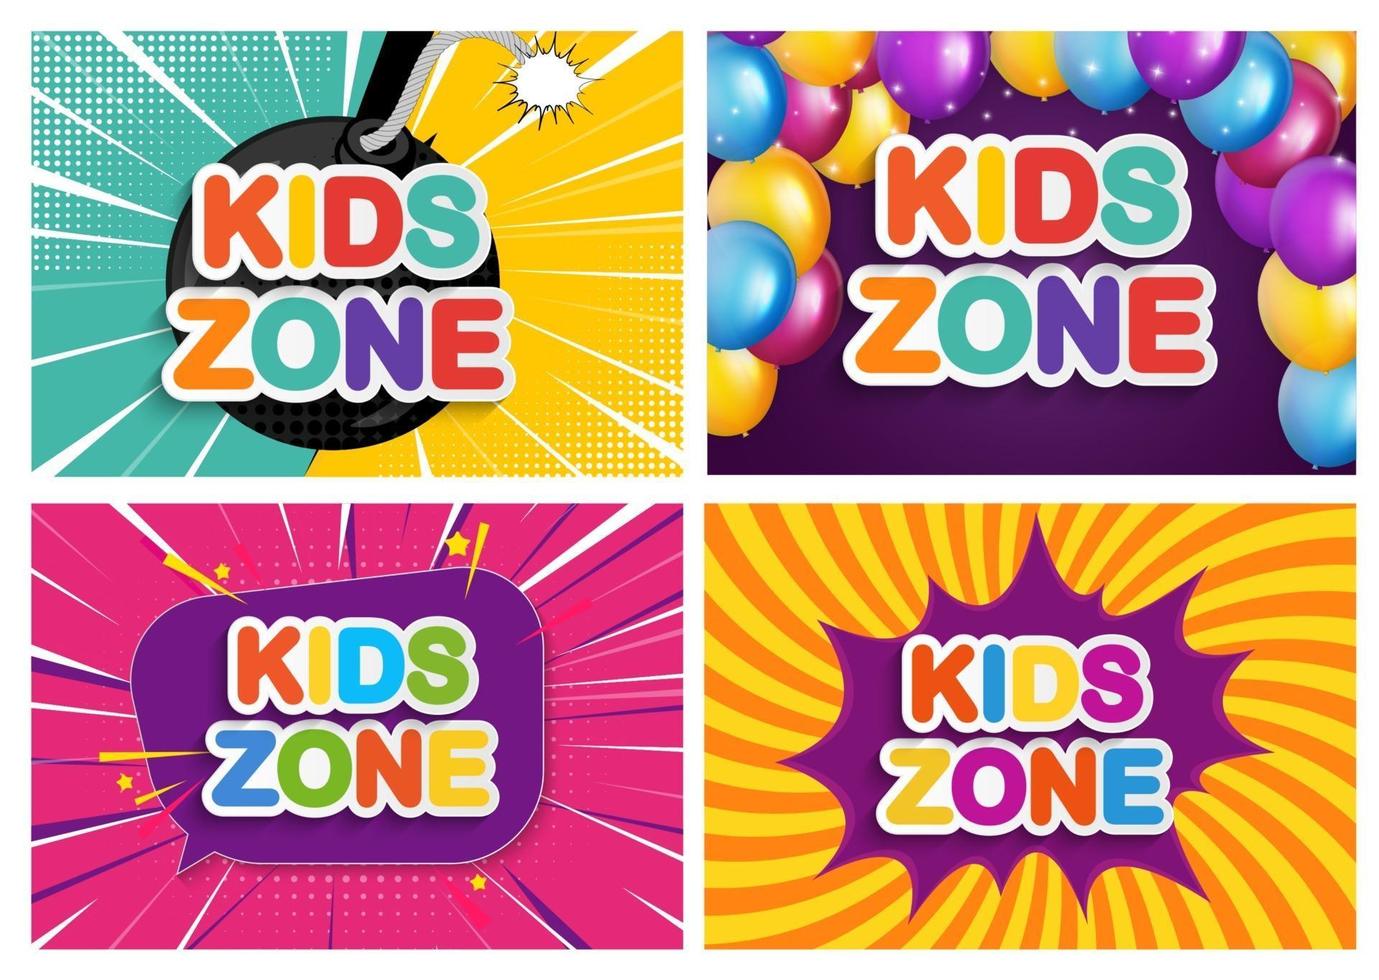 Kids zone banner for Children game, party, posters, play area, entertainment, education room vector